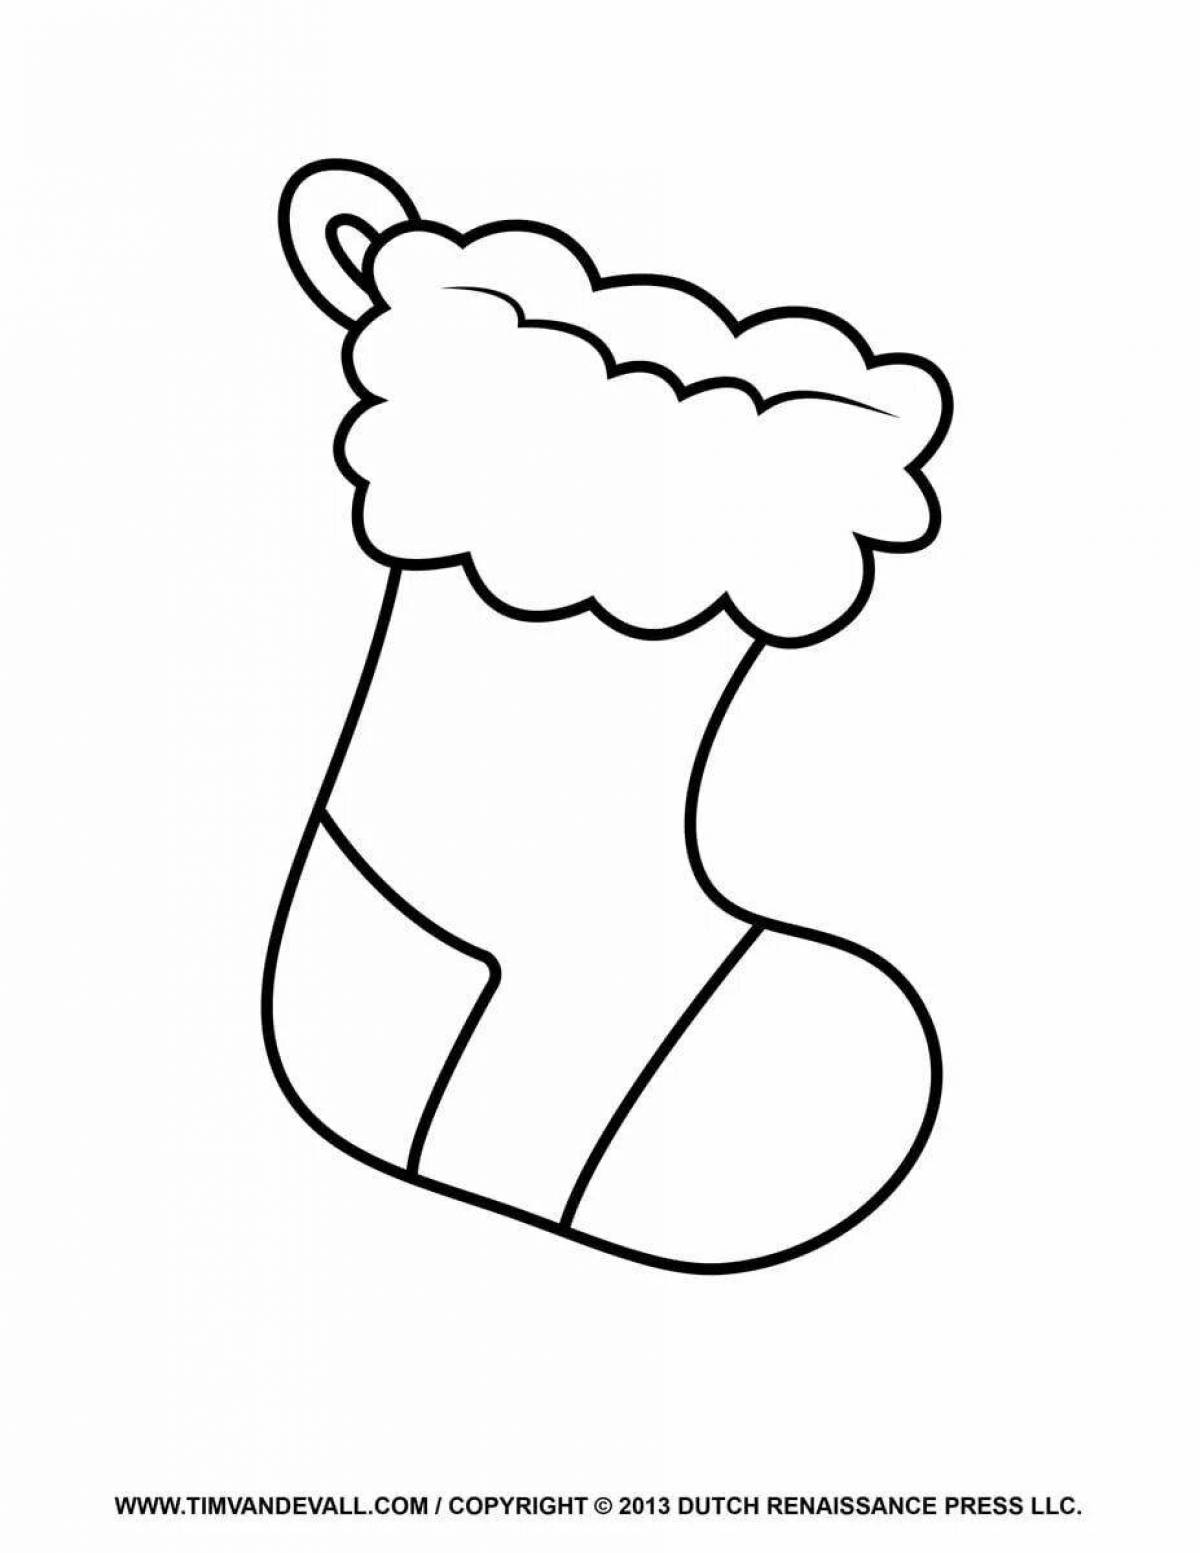 Coloring page of a fascinating pattern of boots